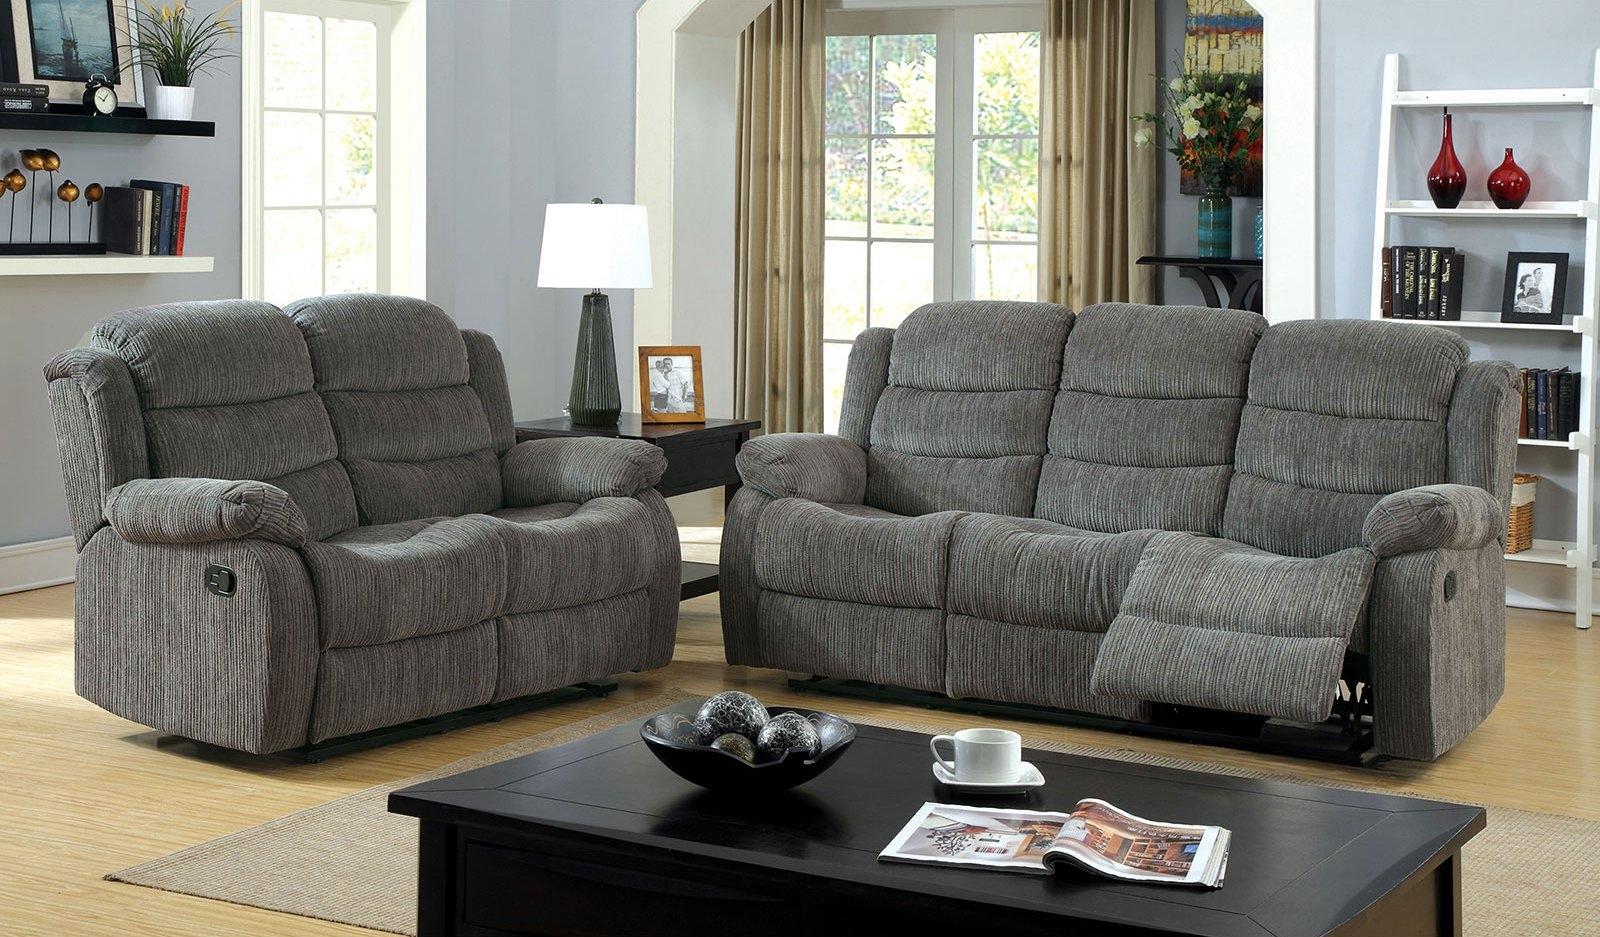 Transitional Recliner Sofa and Loveseat CM6173GY-2PC Millville CM6173GY-2PC in Gray Chenille